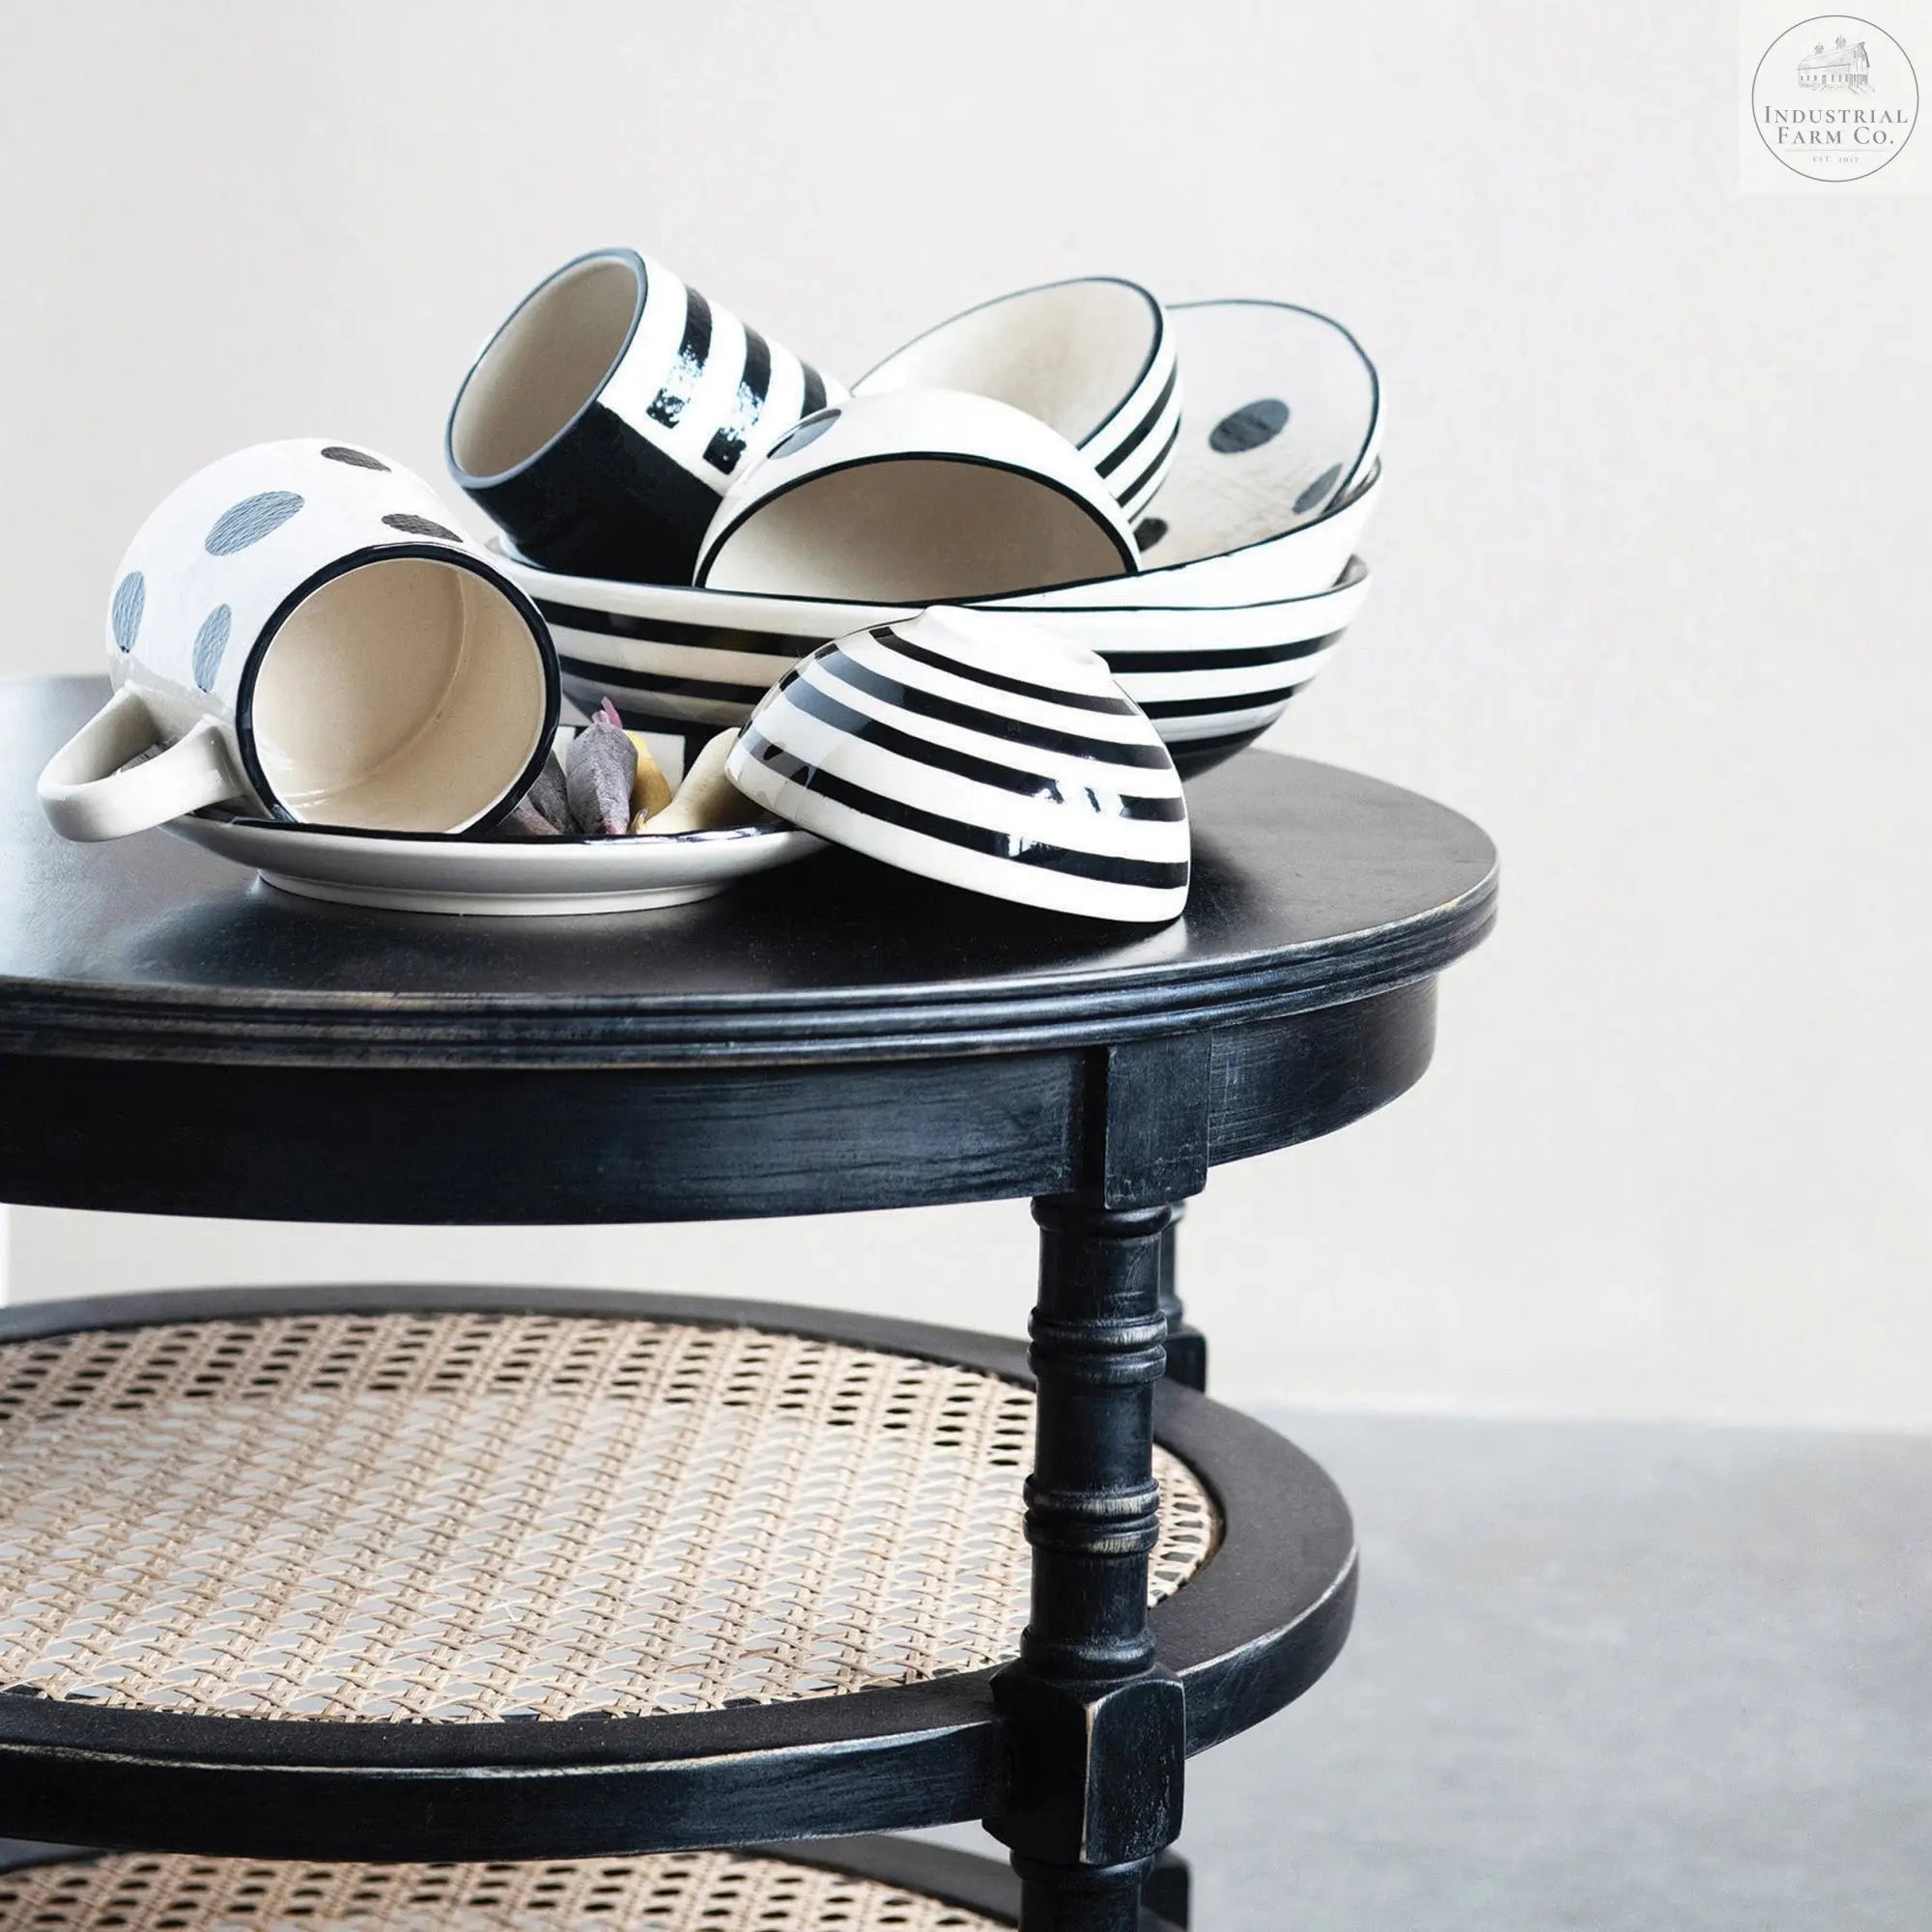 The Walker Hand Painted Bowl  Stripes   | Industrial Farm Co